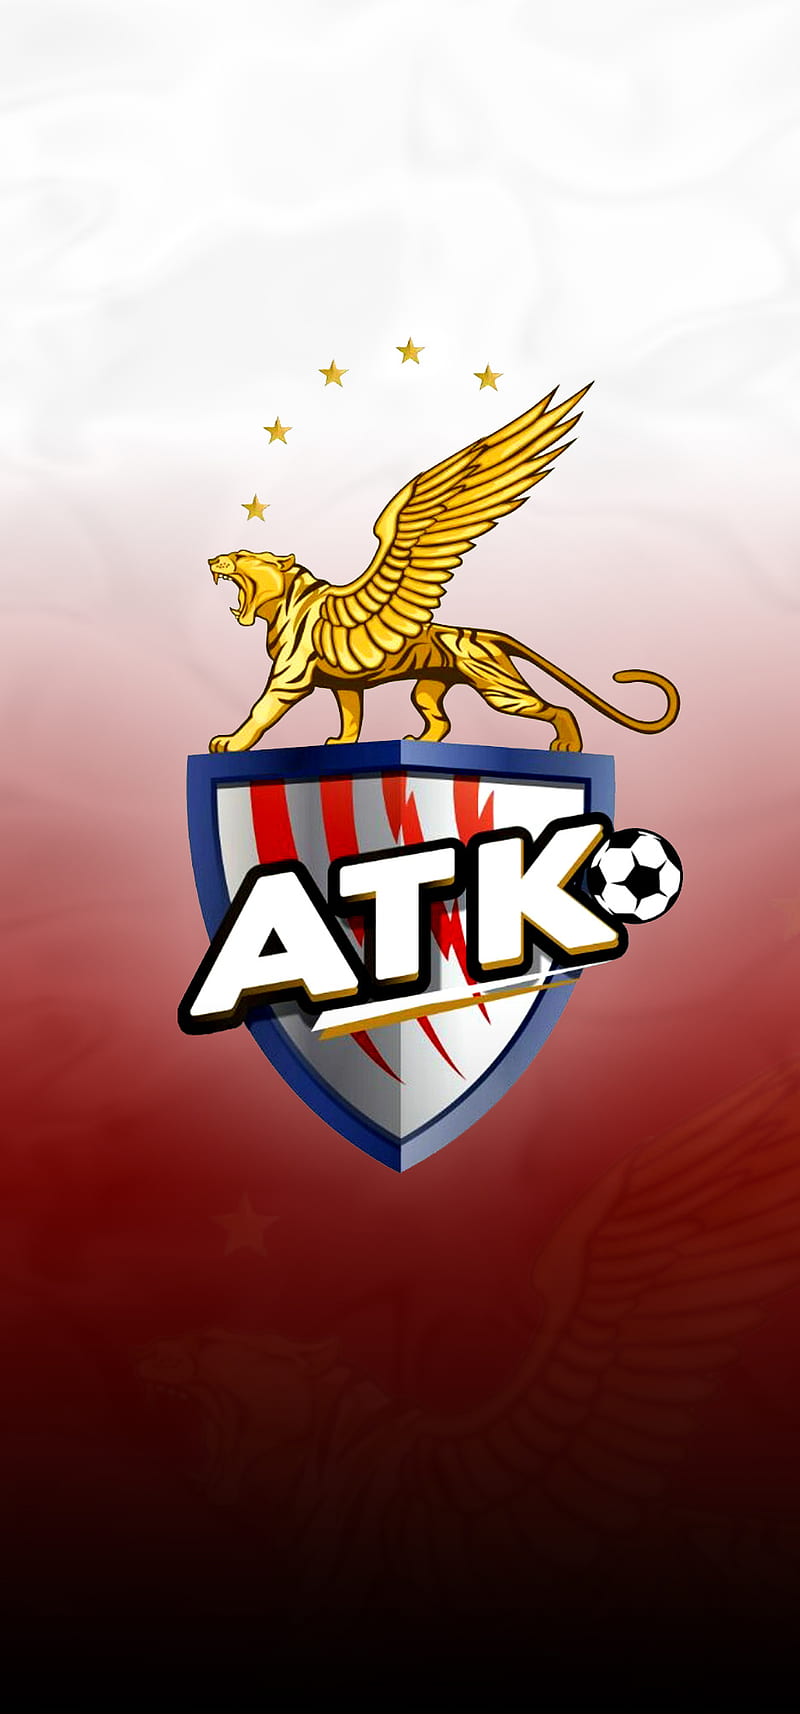 ATK Logo and symbol, meaning, history, PNG, brand